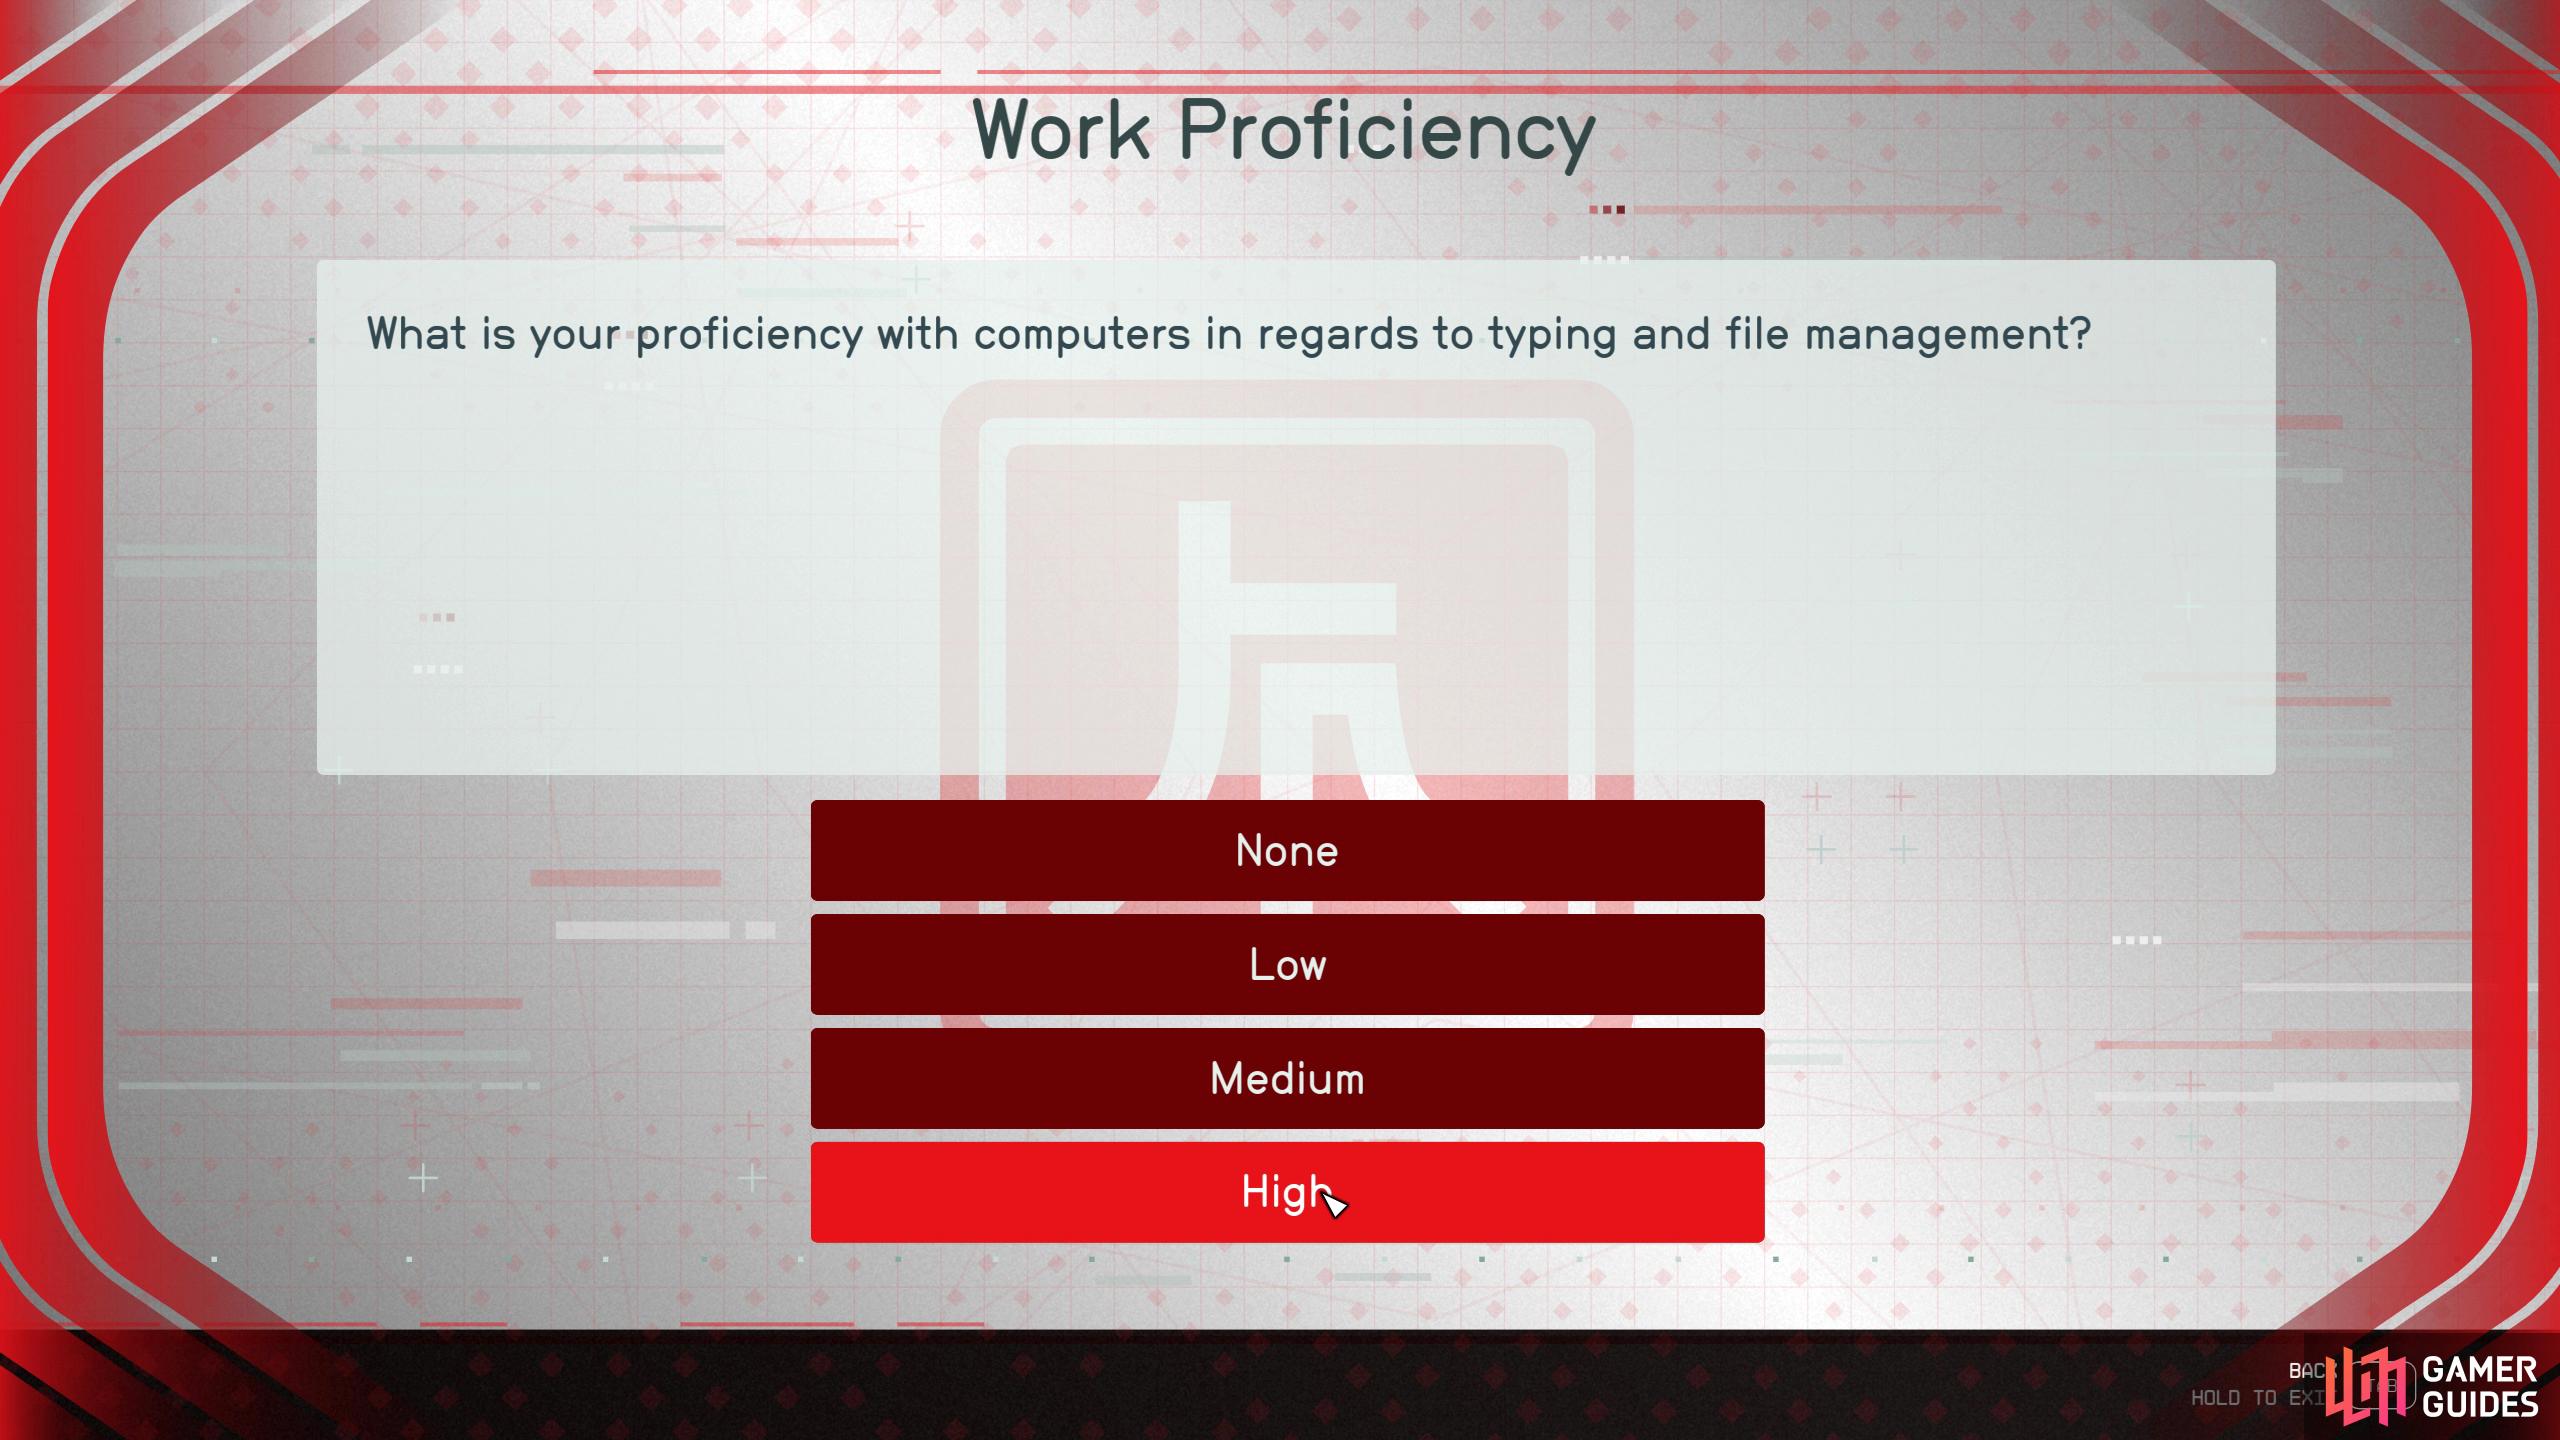 Tell them you are highly proficient with computers for Work Proficiency.